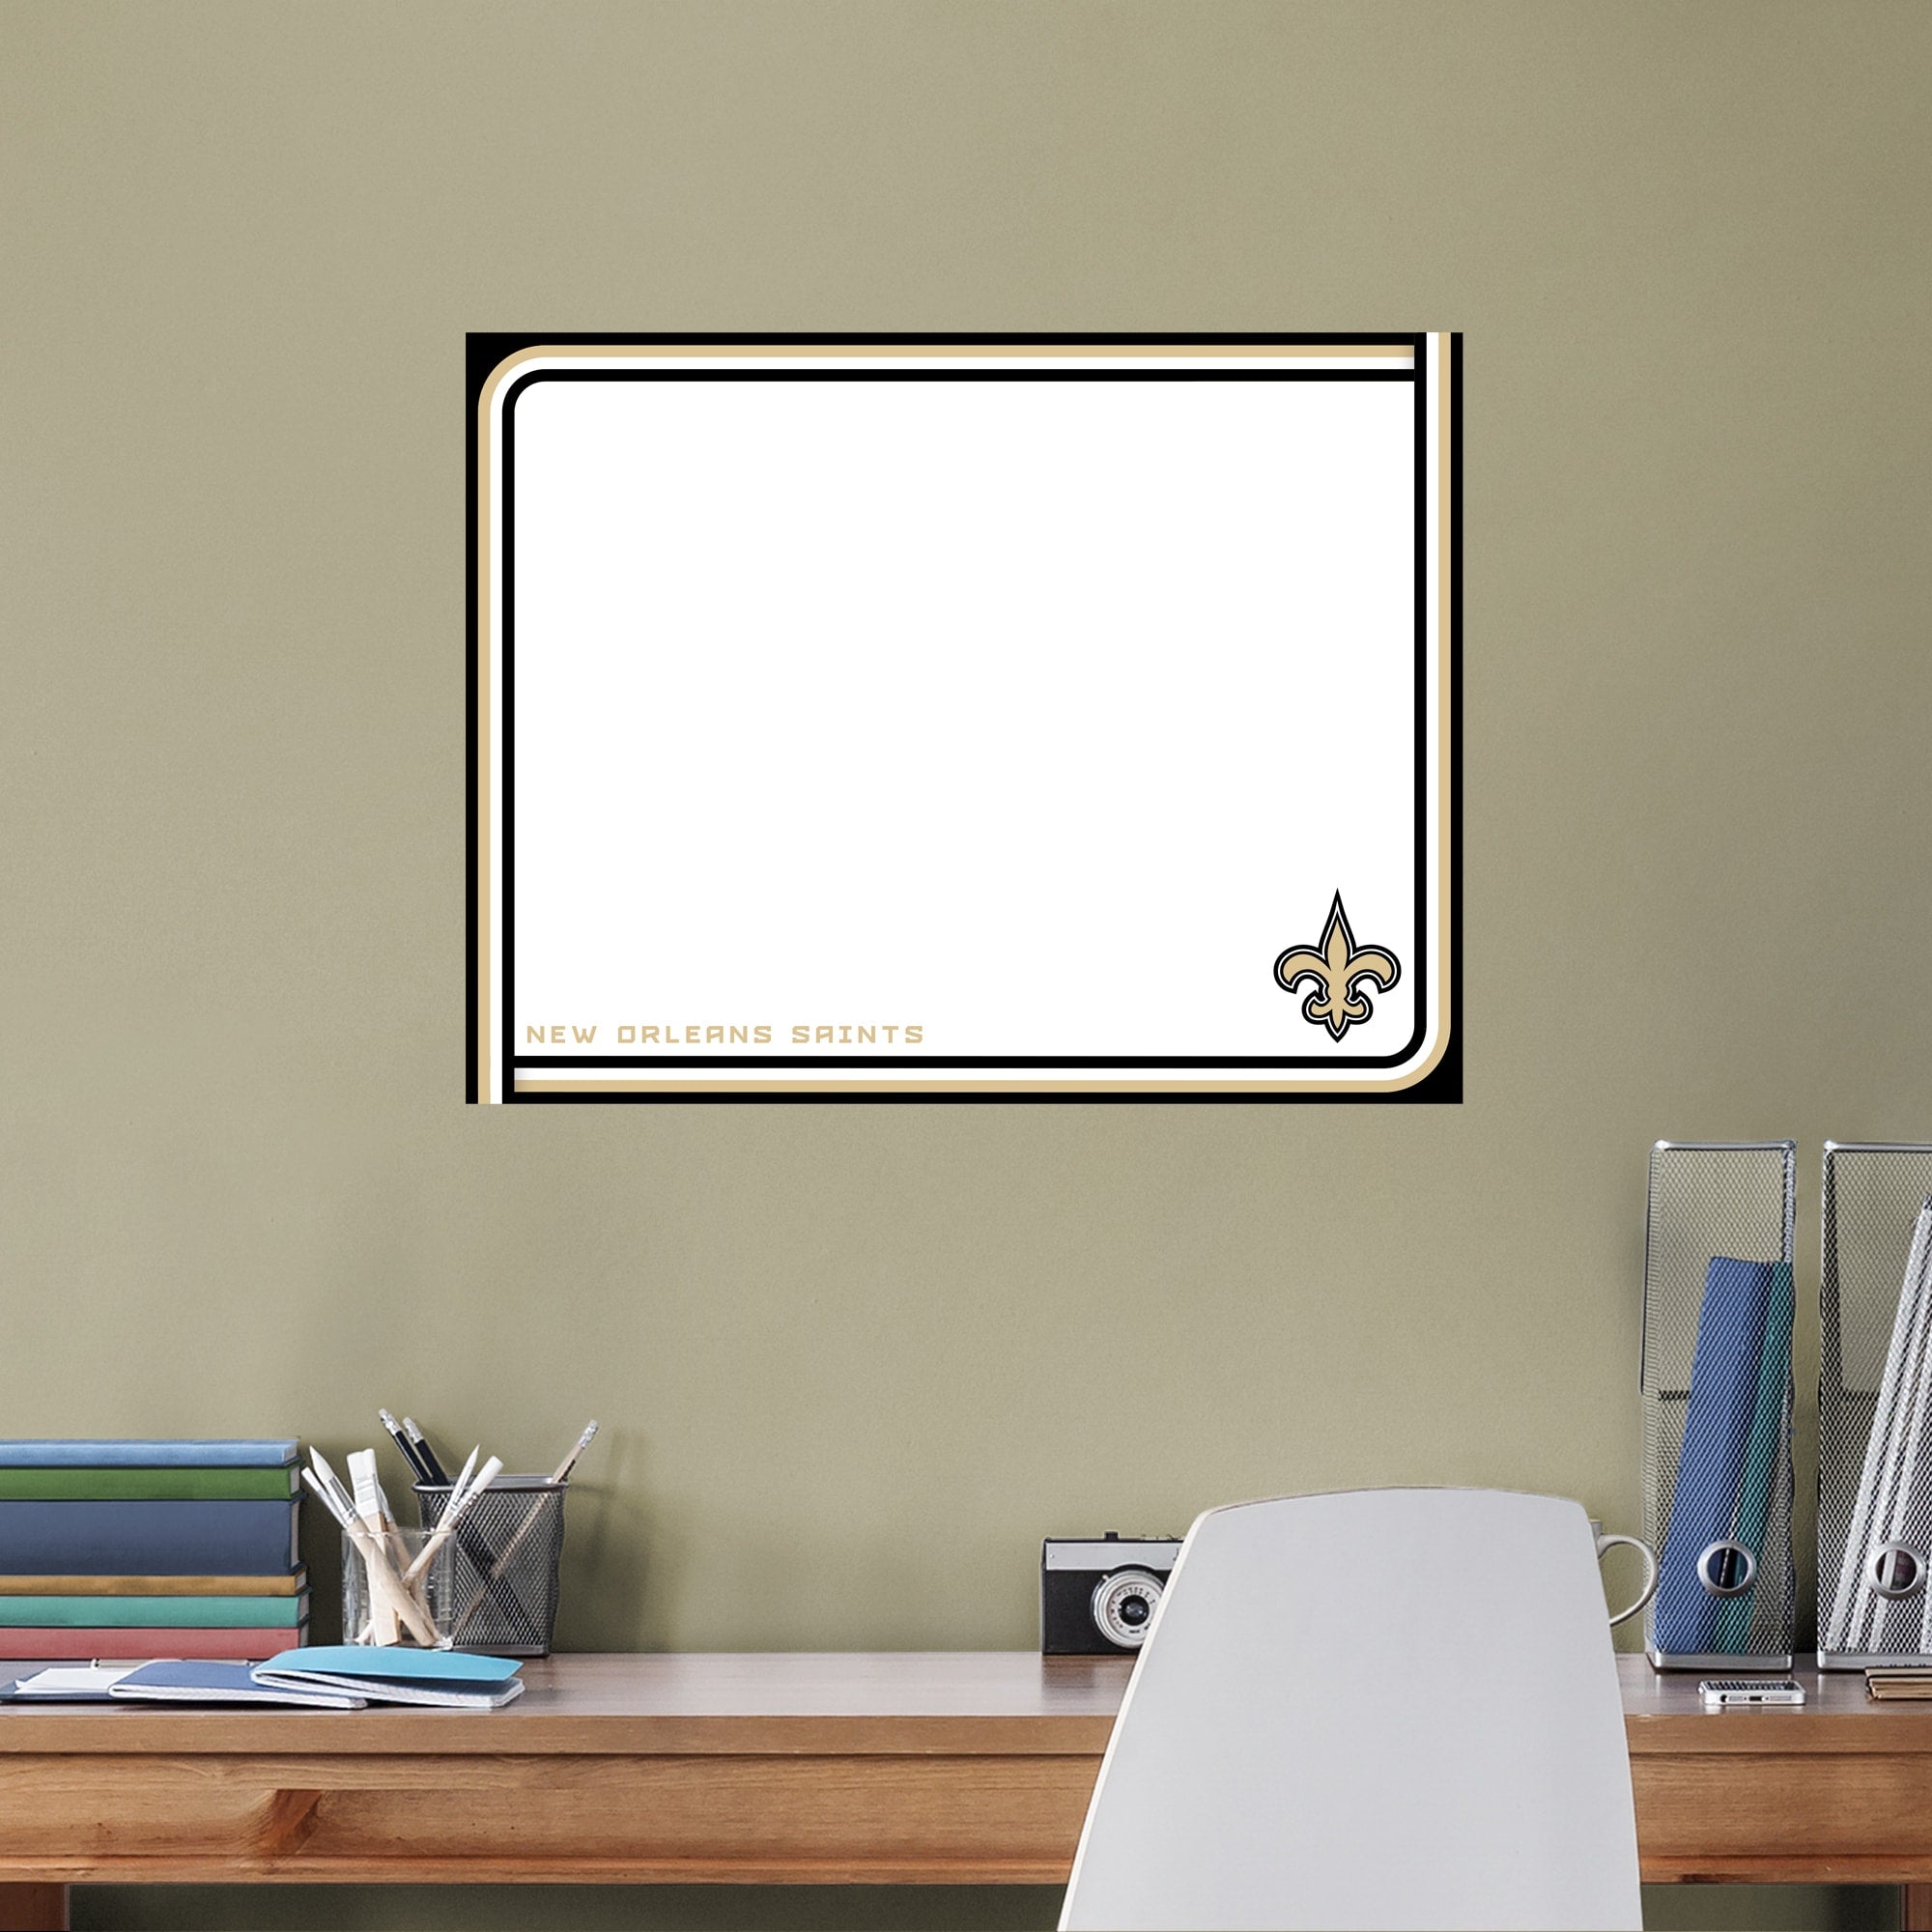 New Orleans Saints: Dry Erase Whiteboard - Officially Licensed NFL Removable Wall Decal XL by Fathead | Vinyl